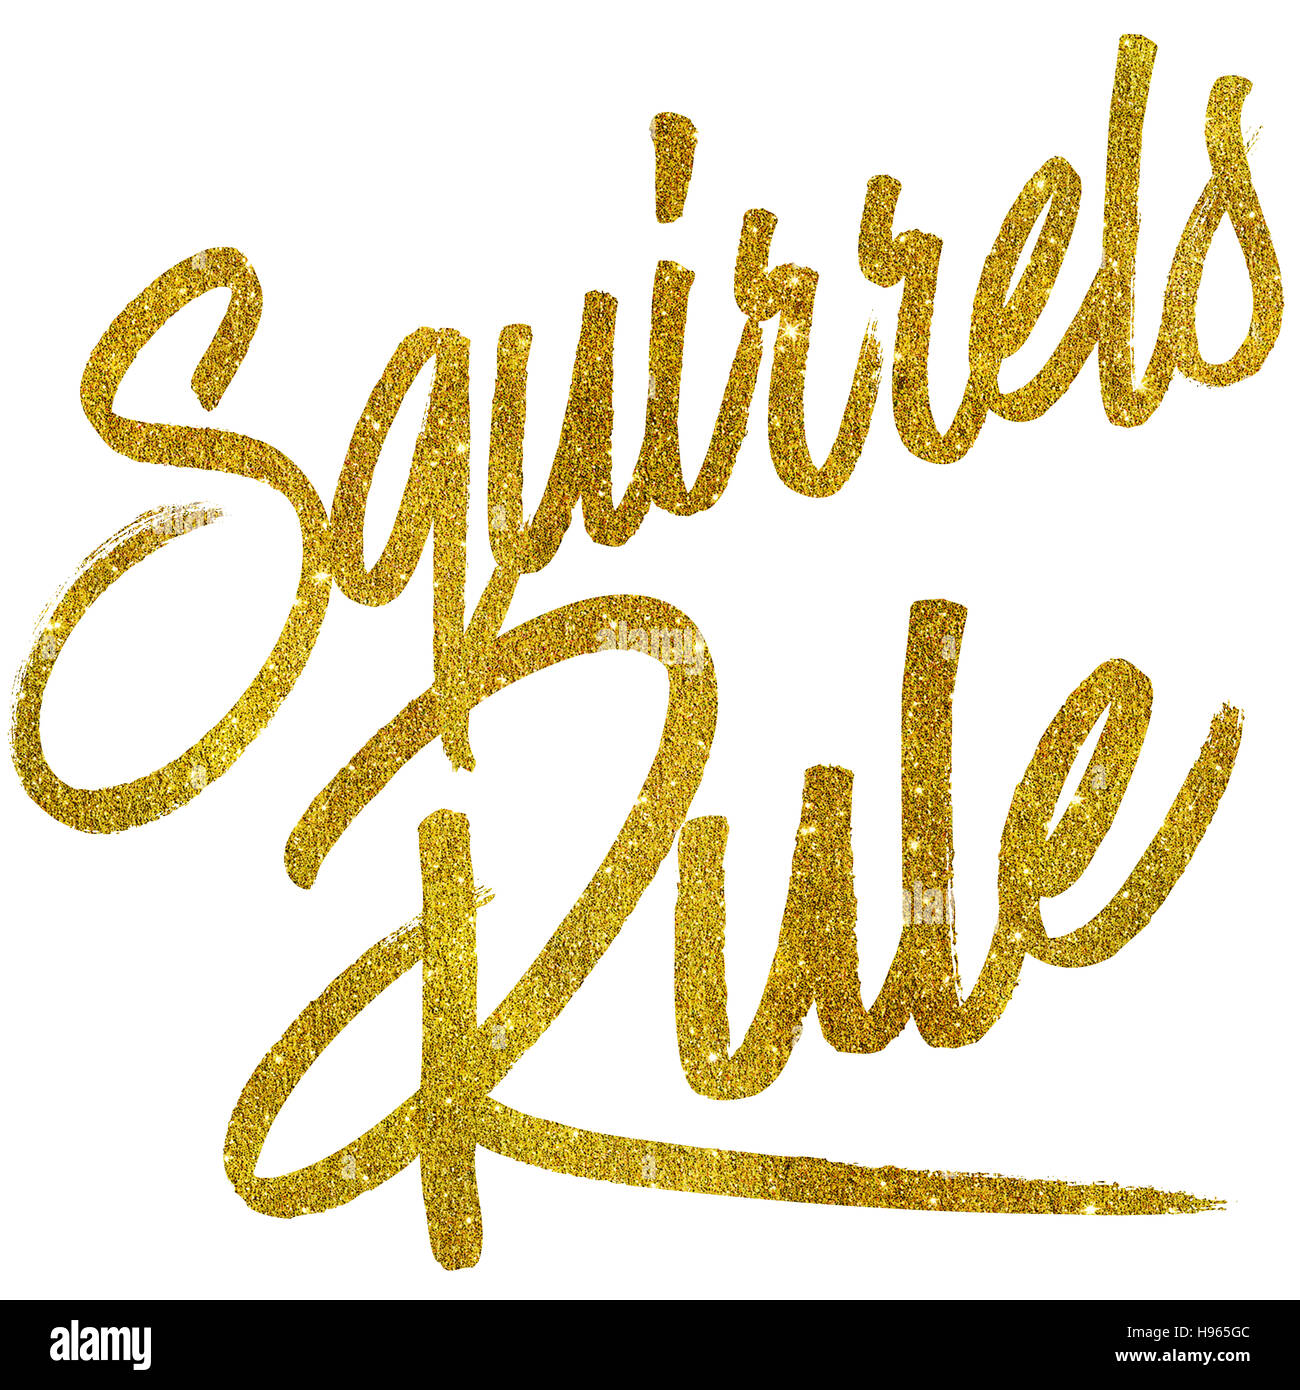 Squirrels Rule Gold Faux Foil Metallic Glitter Quote Isolated Stock Photo